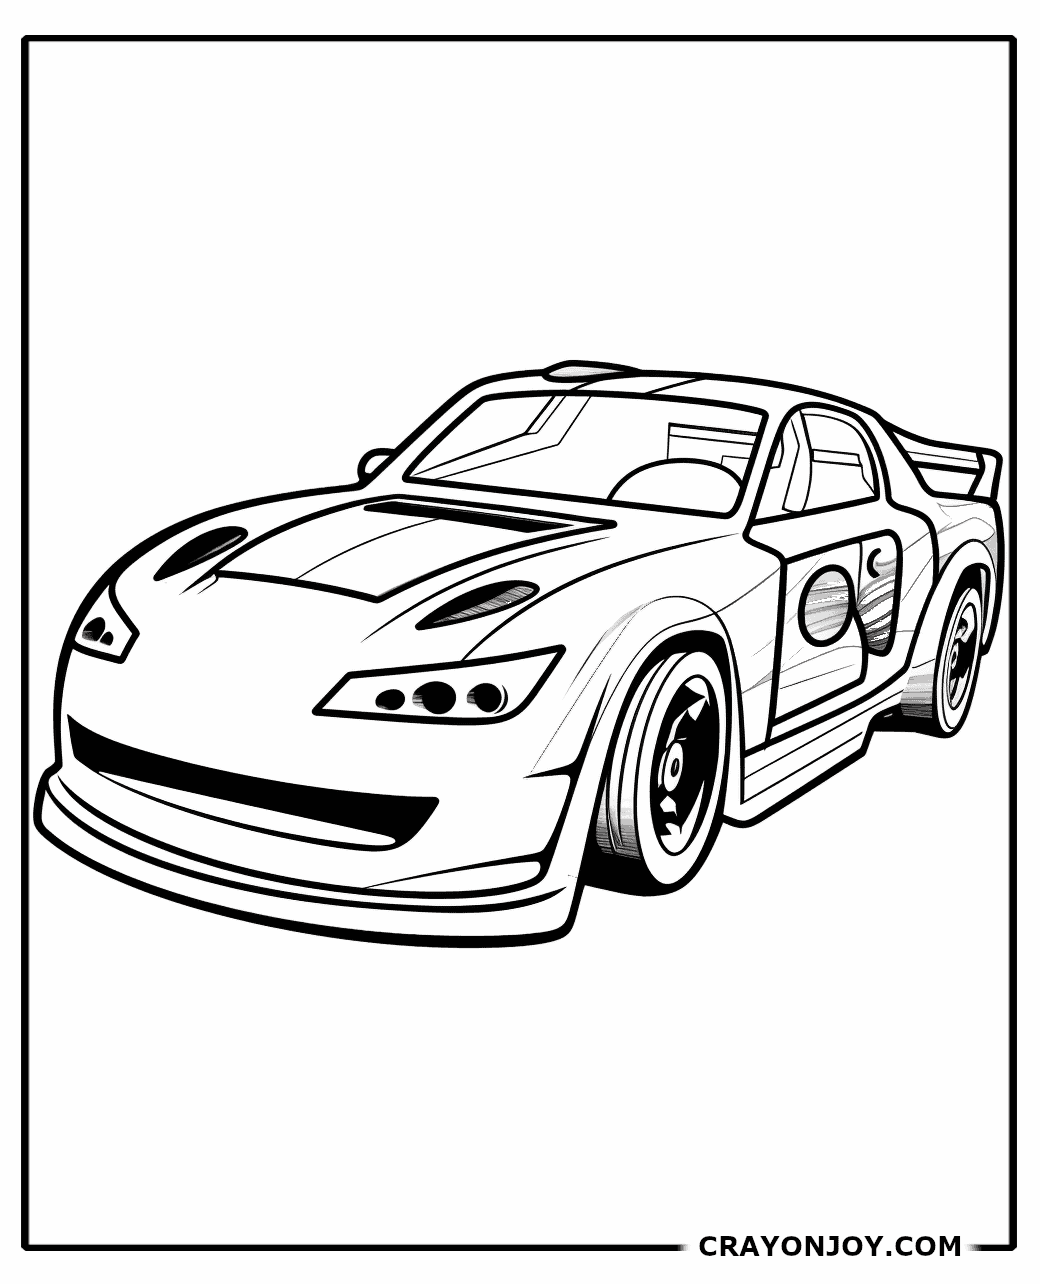 Free Printable NASCAR Coloring Pages for Kids and Adults